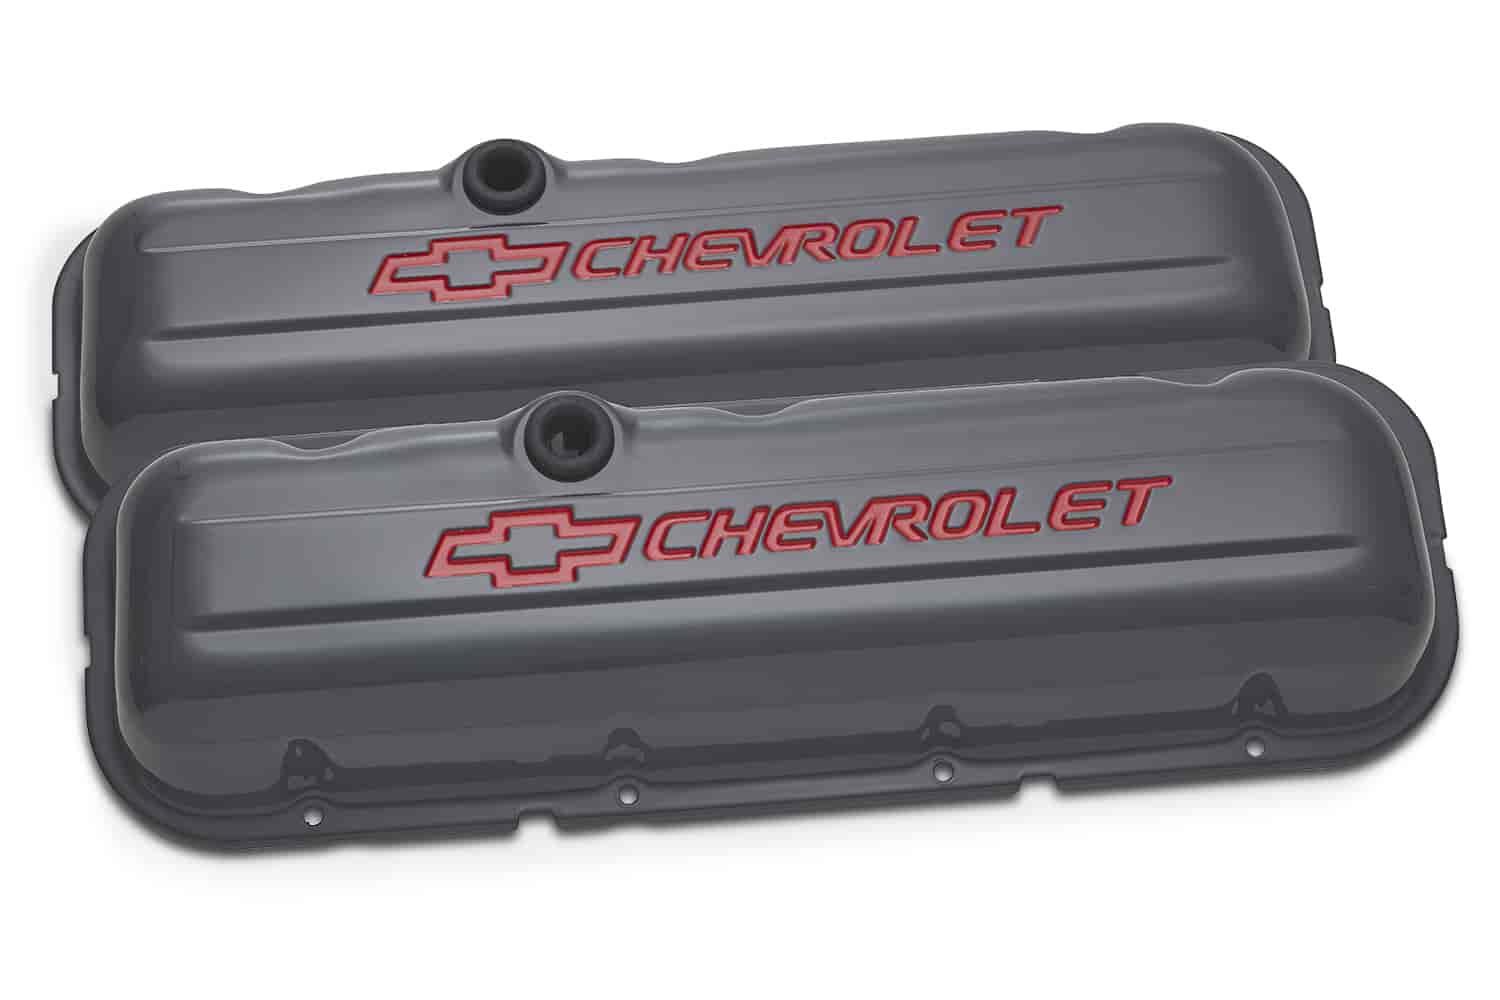 Stamped Steel Tall Valve Covers for 1965-1996 Big Block Chevy with Chevrolet/Bowtie Recessed Emblem in Shark Gray Finish